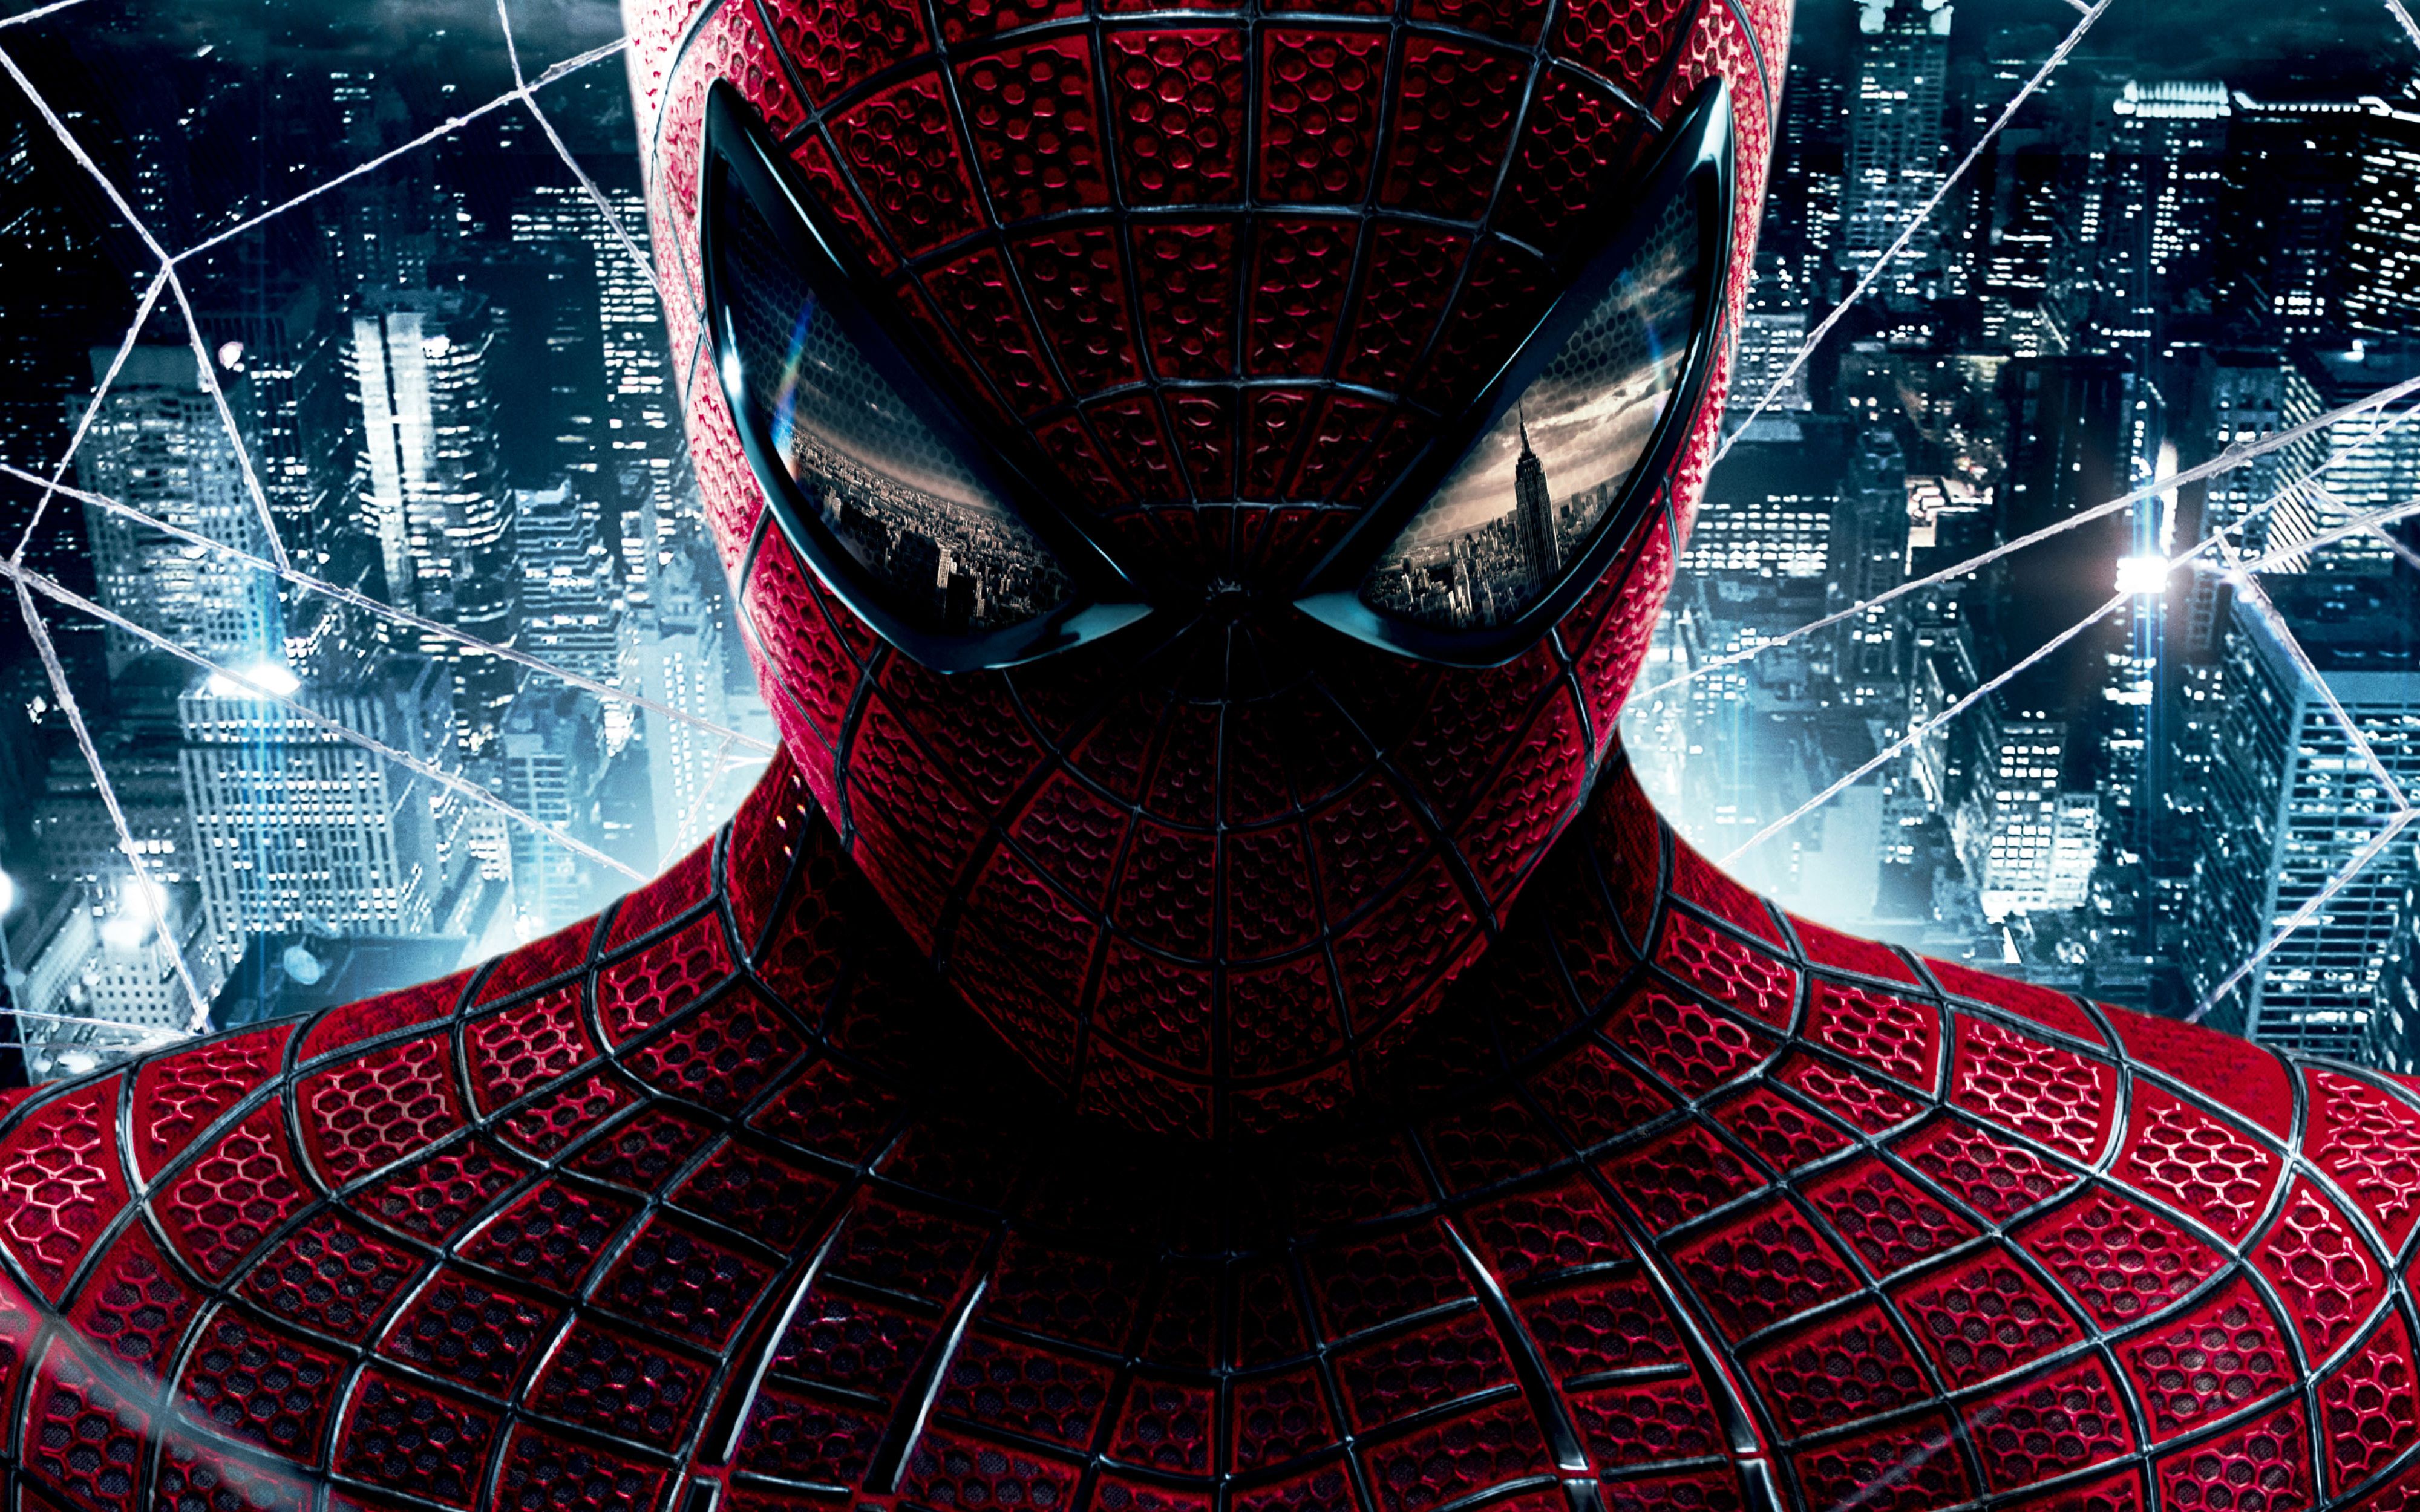 Spiderman 4K wallpaper for your desktop or mobile screen free and easy to download